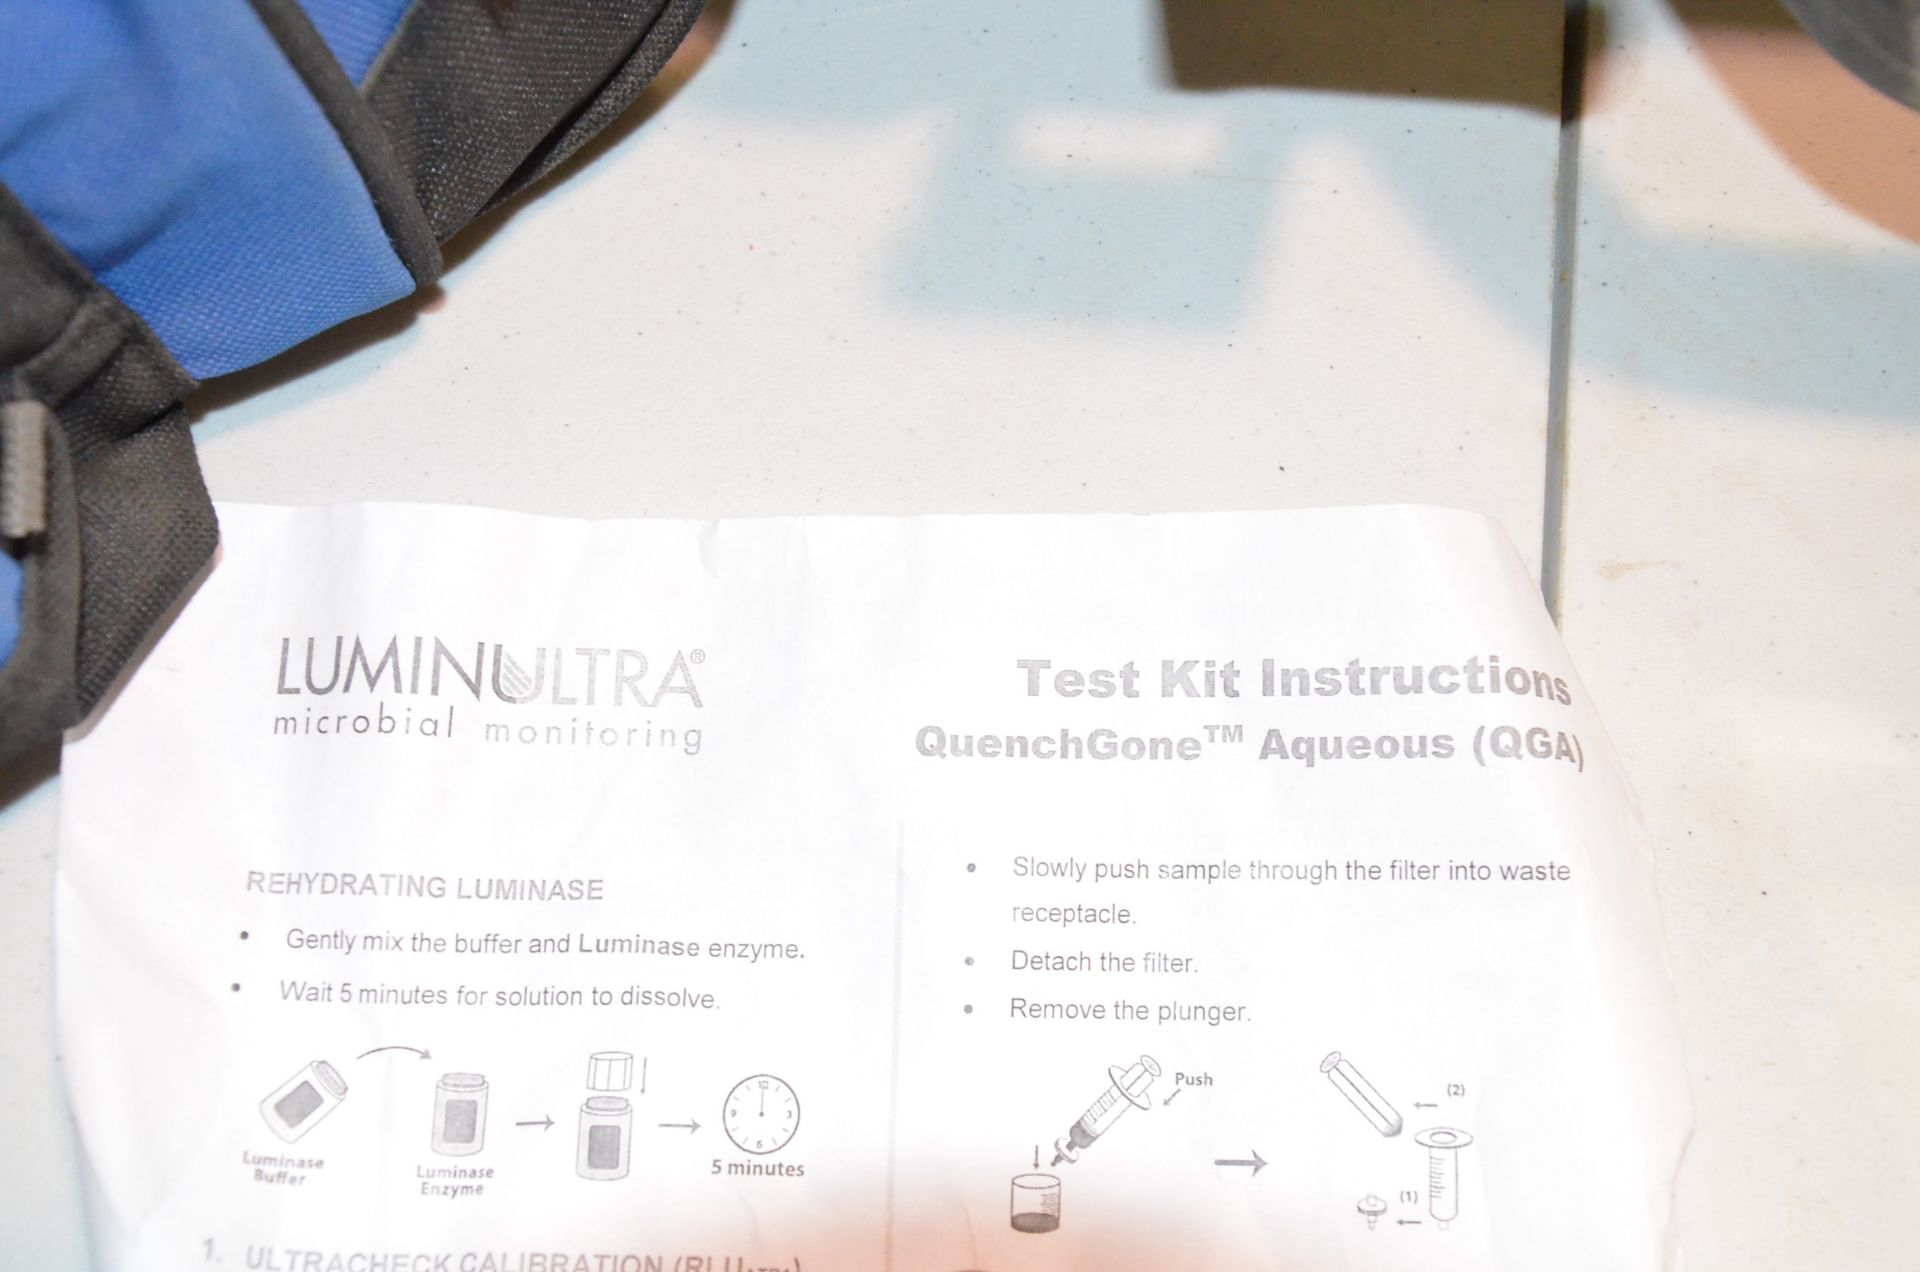 LUMINULTRA MICROBIAL MONITORING AND TESTING KIT, S/N N/A - Image 4 of 4